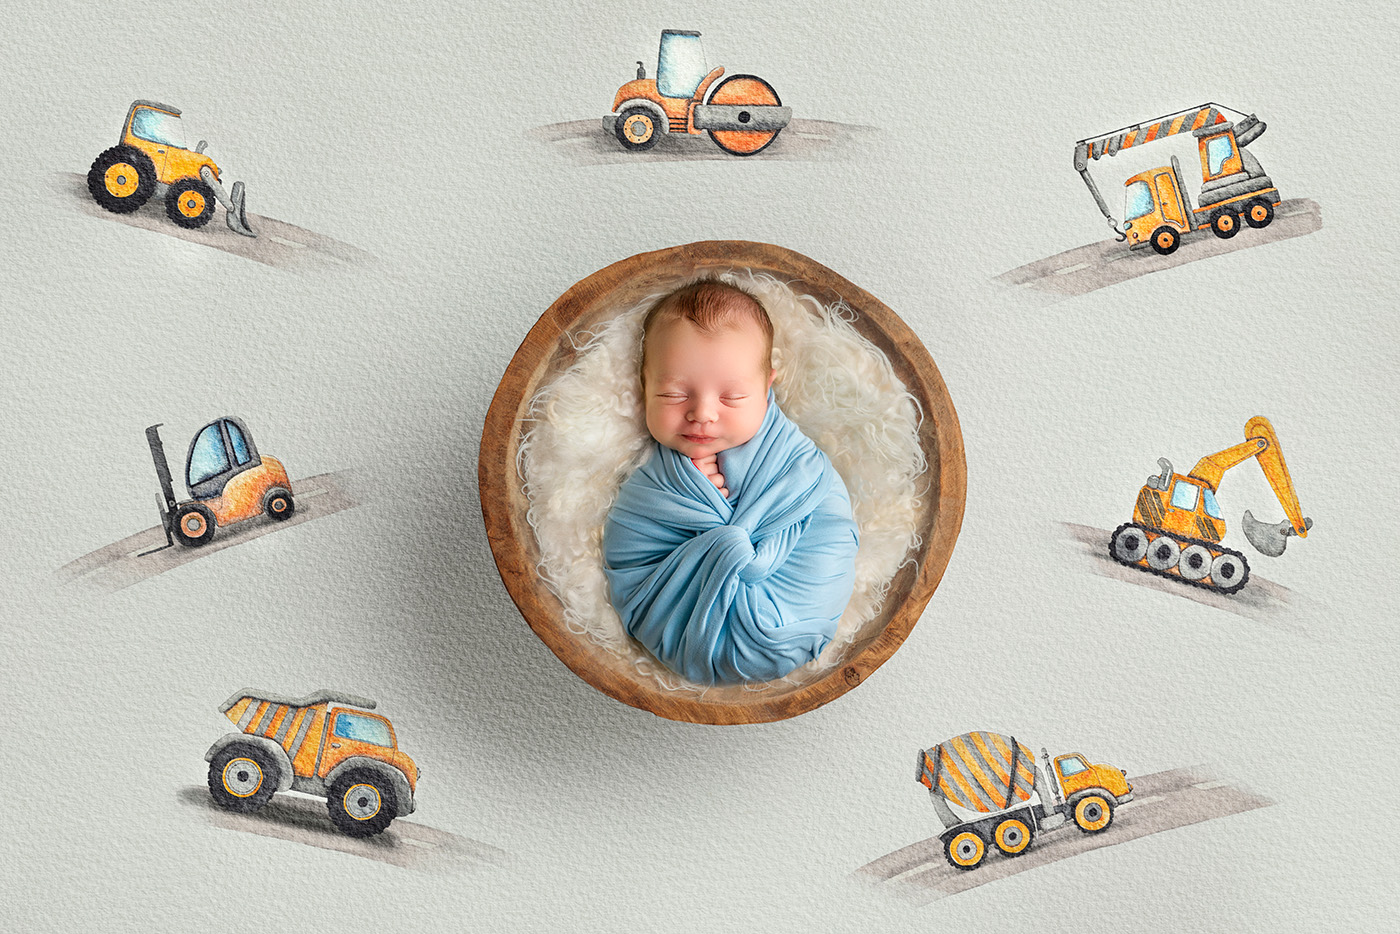 baby Joseph peacefully sleeping amidst a backdrop of construction machinery